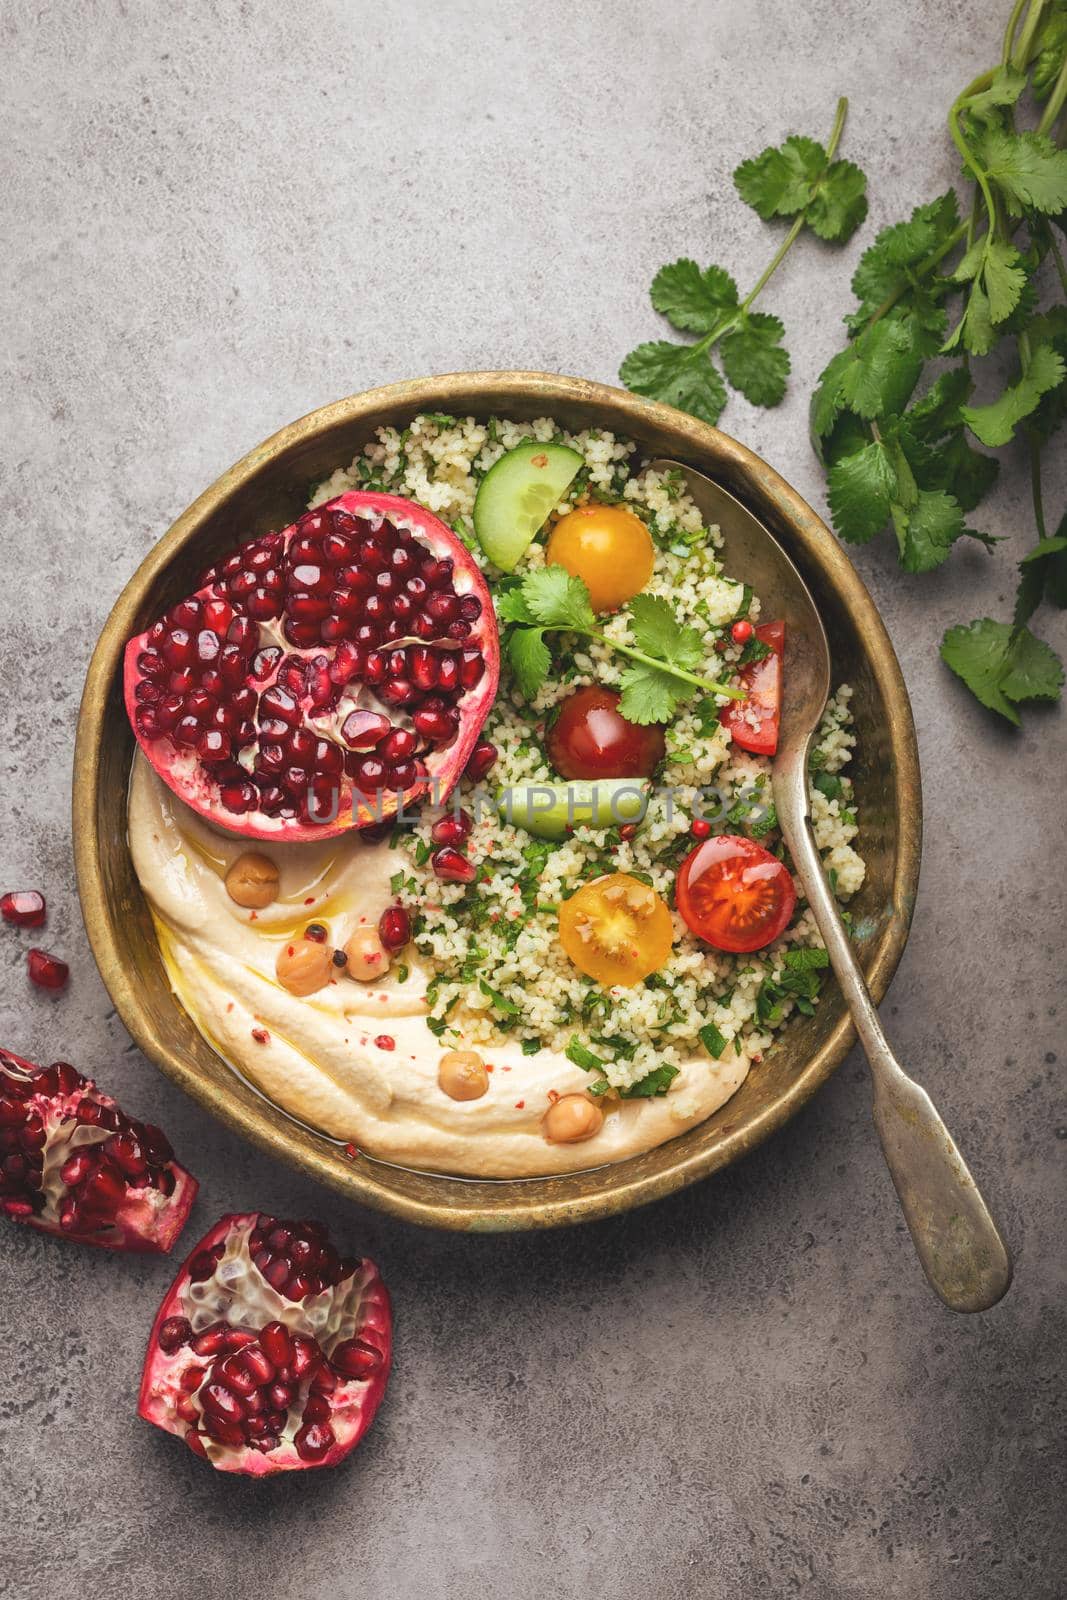 Rustic bowl with couscous salad with vegetables, hummus and fresh cut pomegranate. Middle eastern or Arab style meal with seasonings and fresh cilantro. Healthy Mediterranean dinner, toned image.